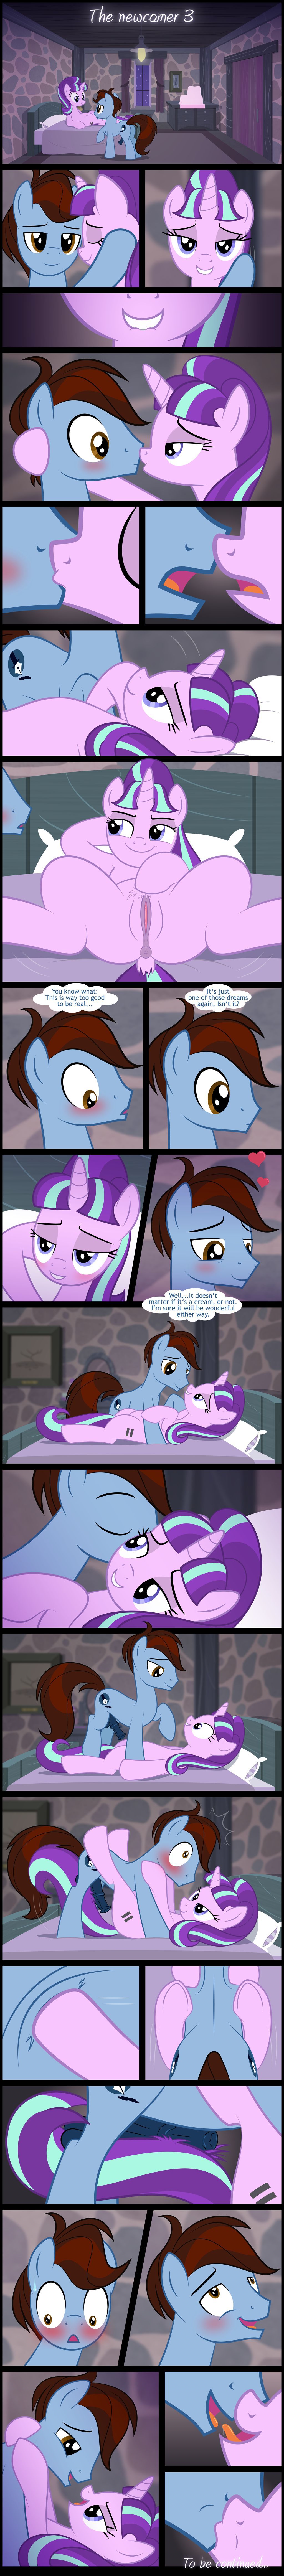 [Culu-Bluebeaver] The Newcomer (My Little Pony: Friendship is Magic) 4